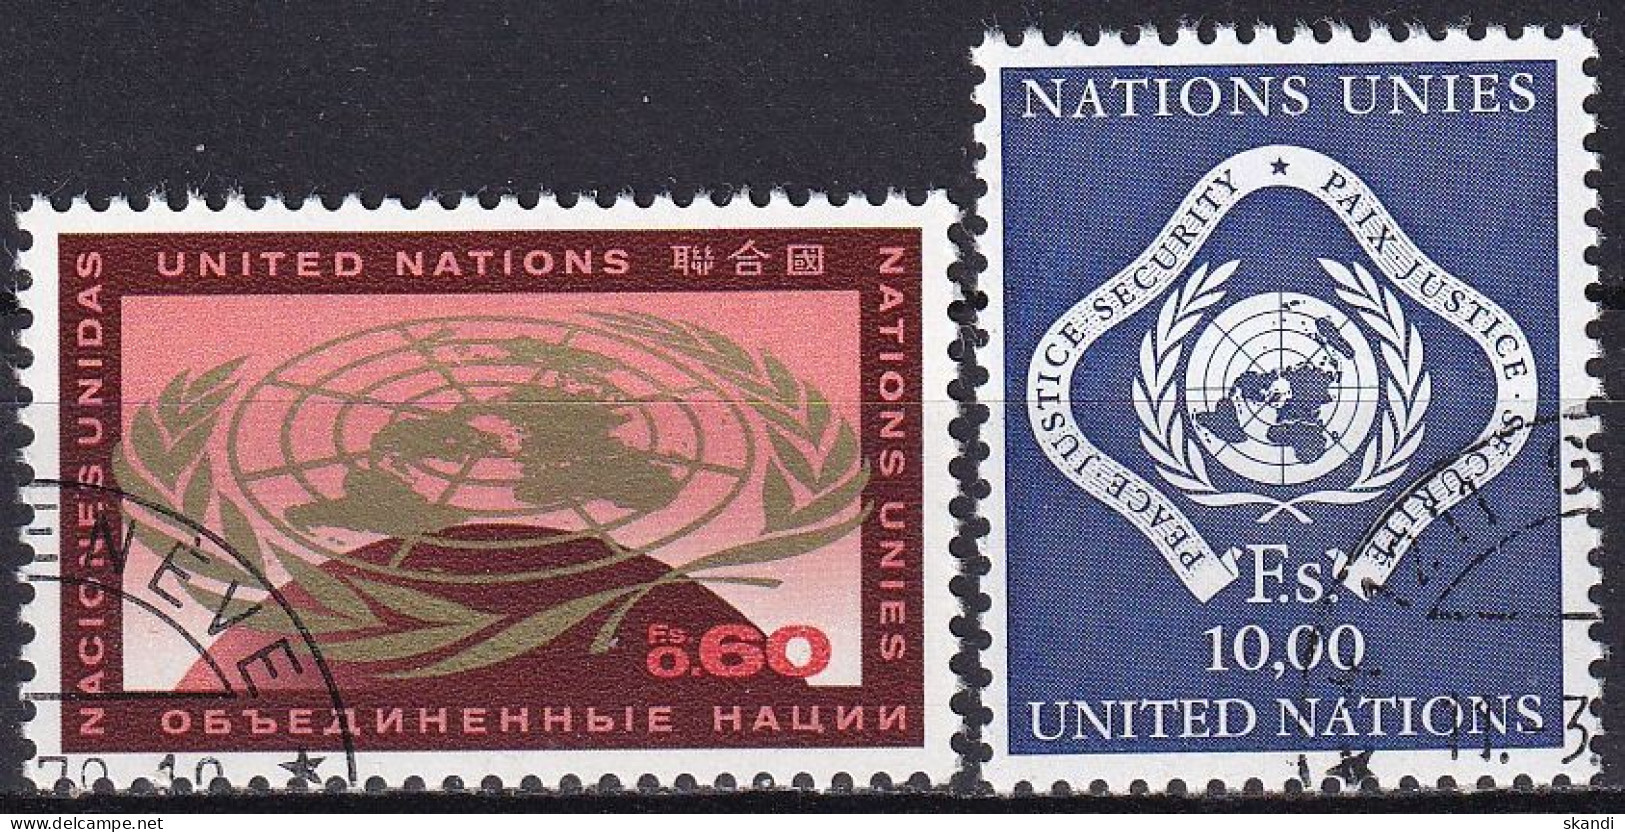 UNO GENF 1970 Mi-Nr. 9/10 O Used - Aus Abo - Used Stamps